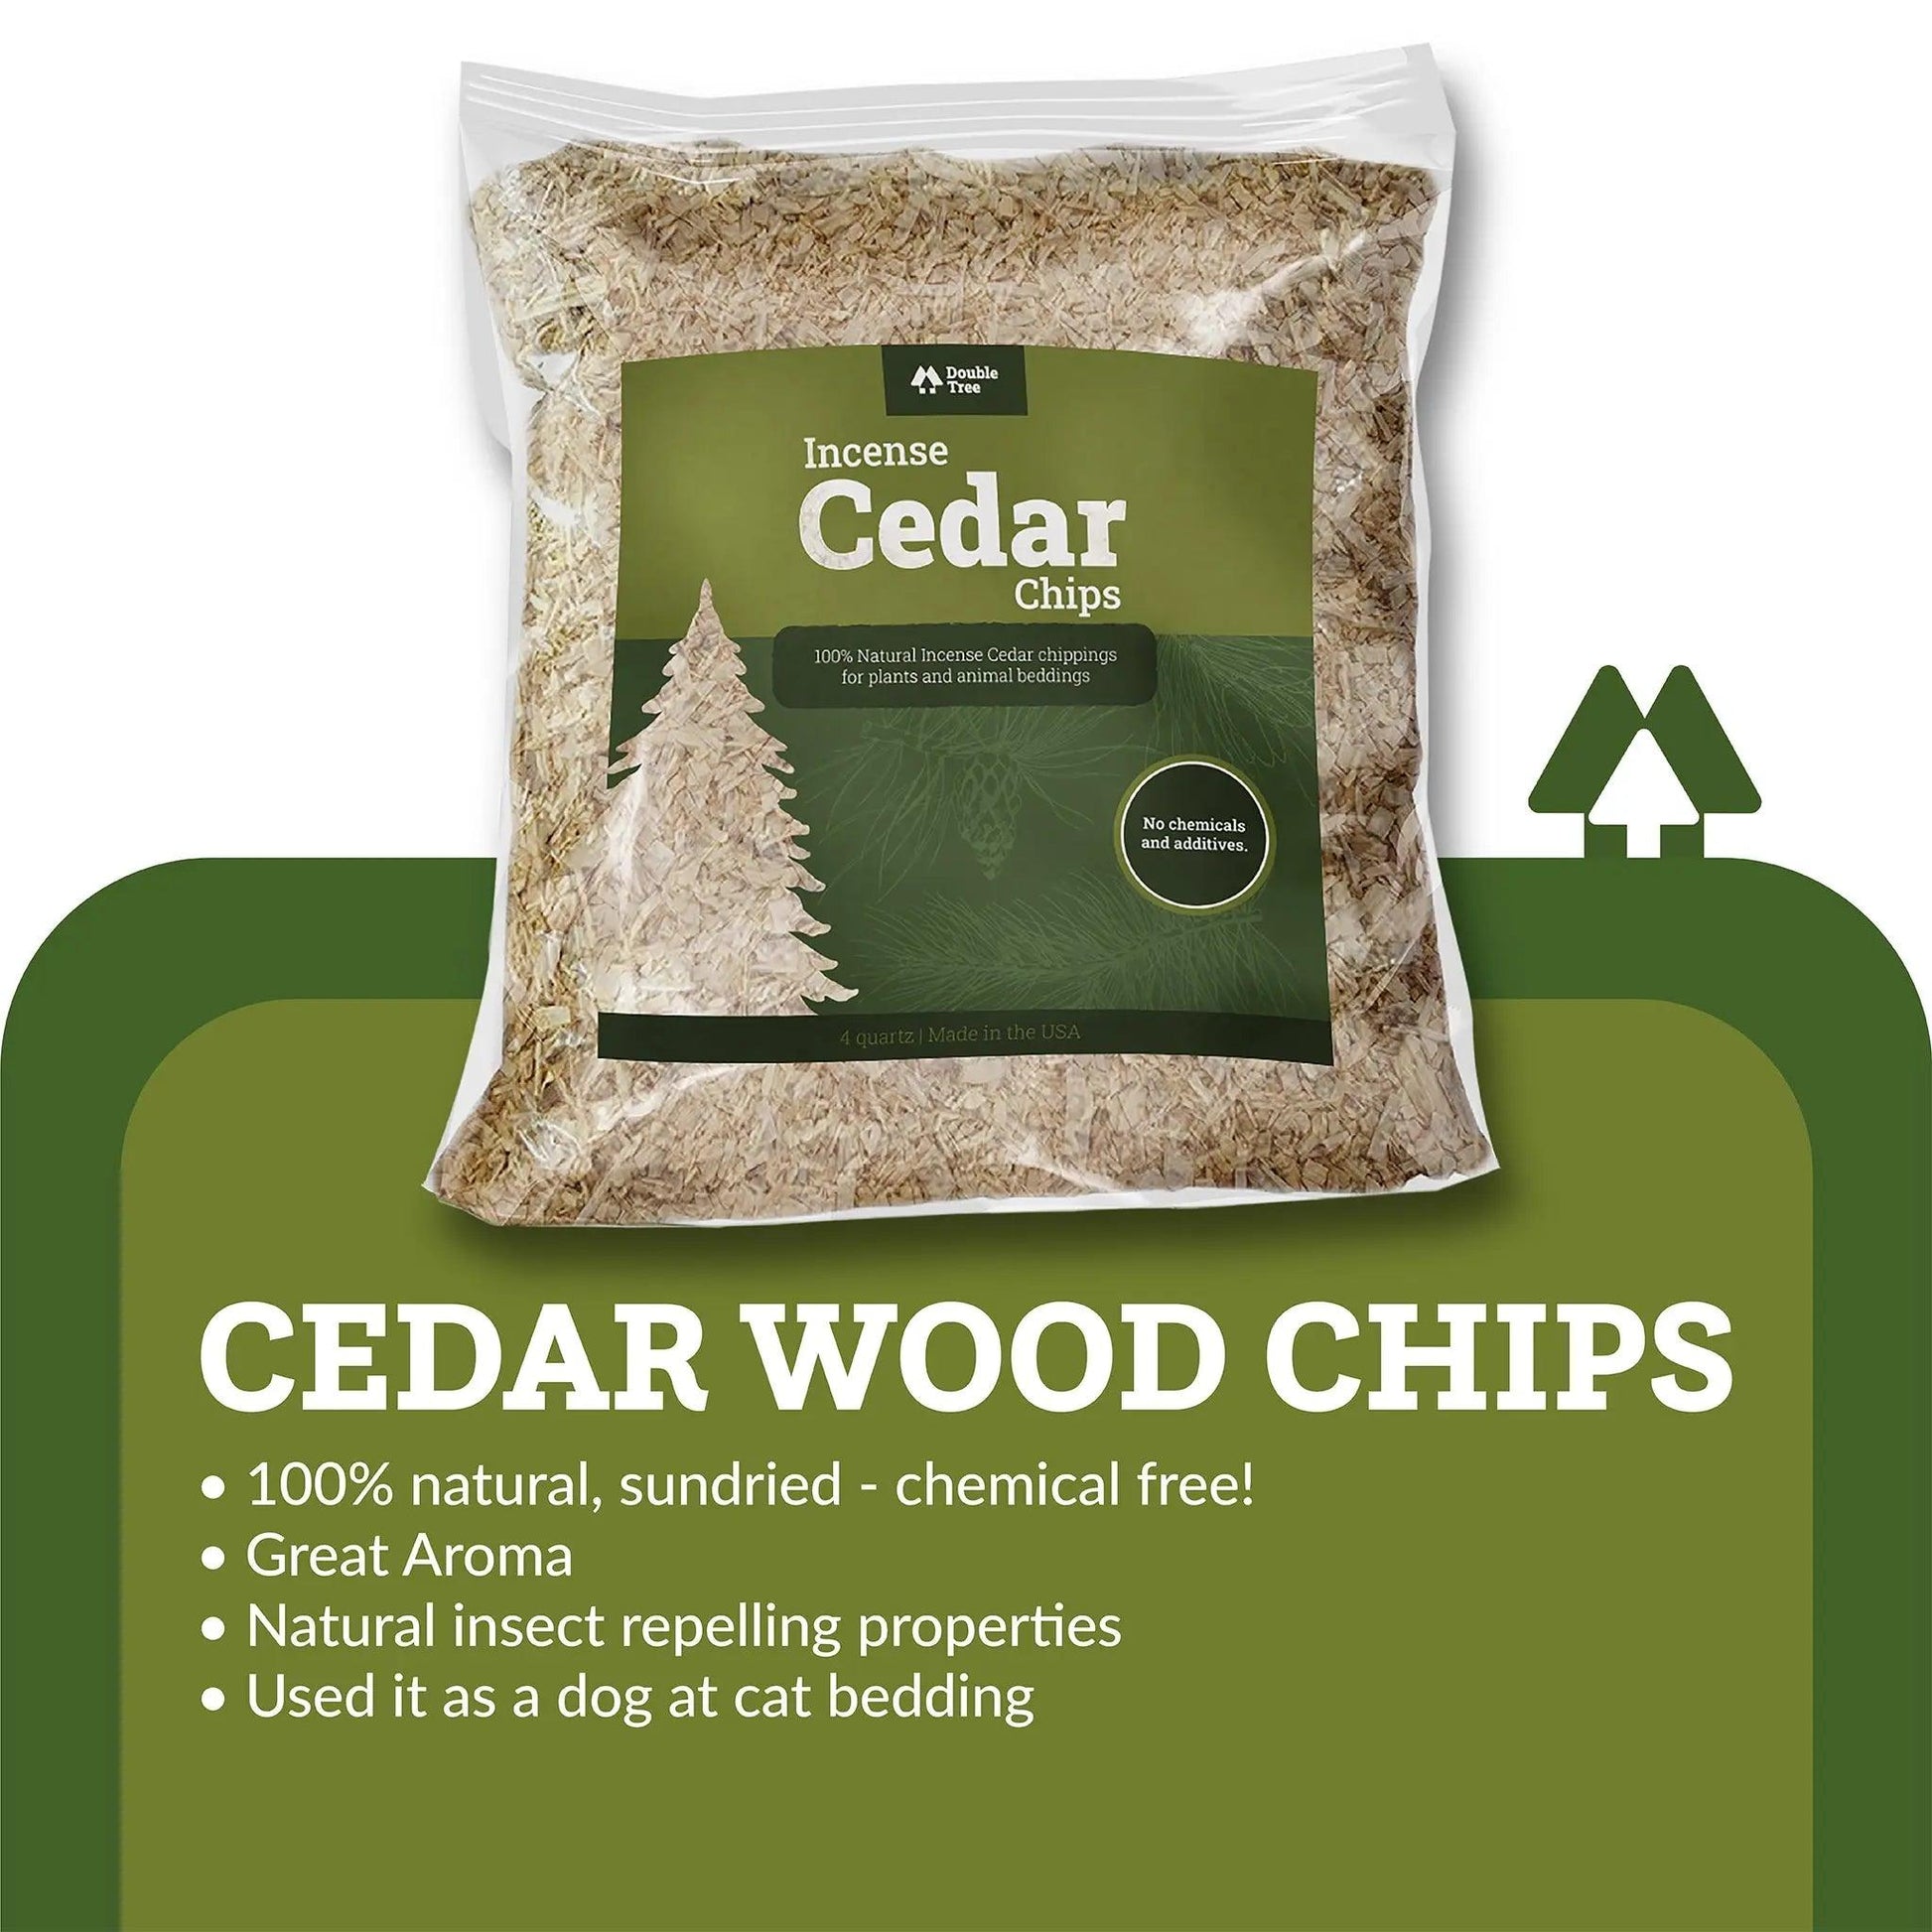 Double Tree Incense Cedar Wood Chips for Potting House Plants, Vegetable Garden Beds, Yard, Pet Bedding & Landscaping, 100% Natural & Shredded, Cedar Shavings for Indoor & Outdoor Use - Double Tree Forest Products